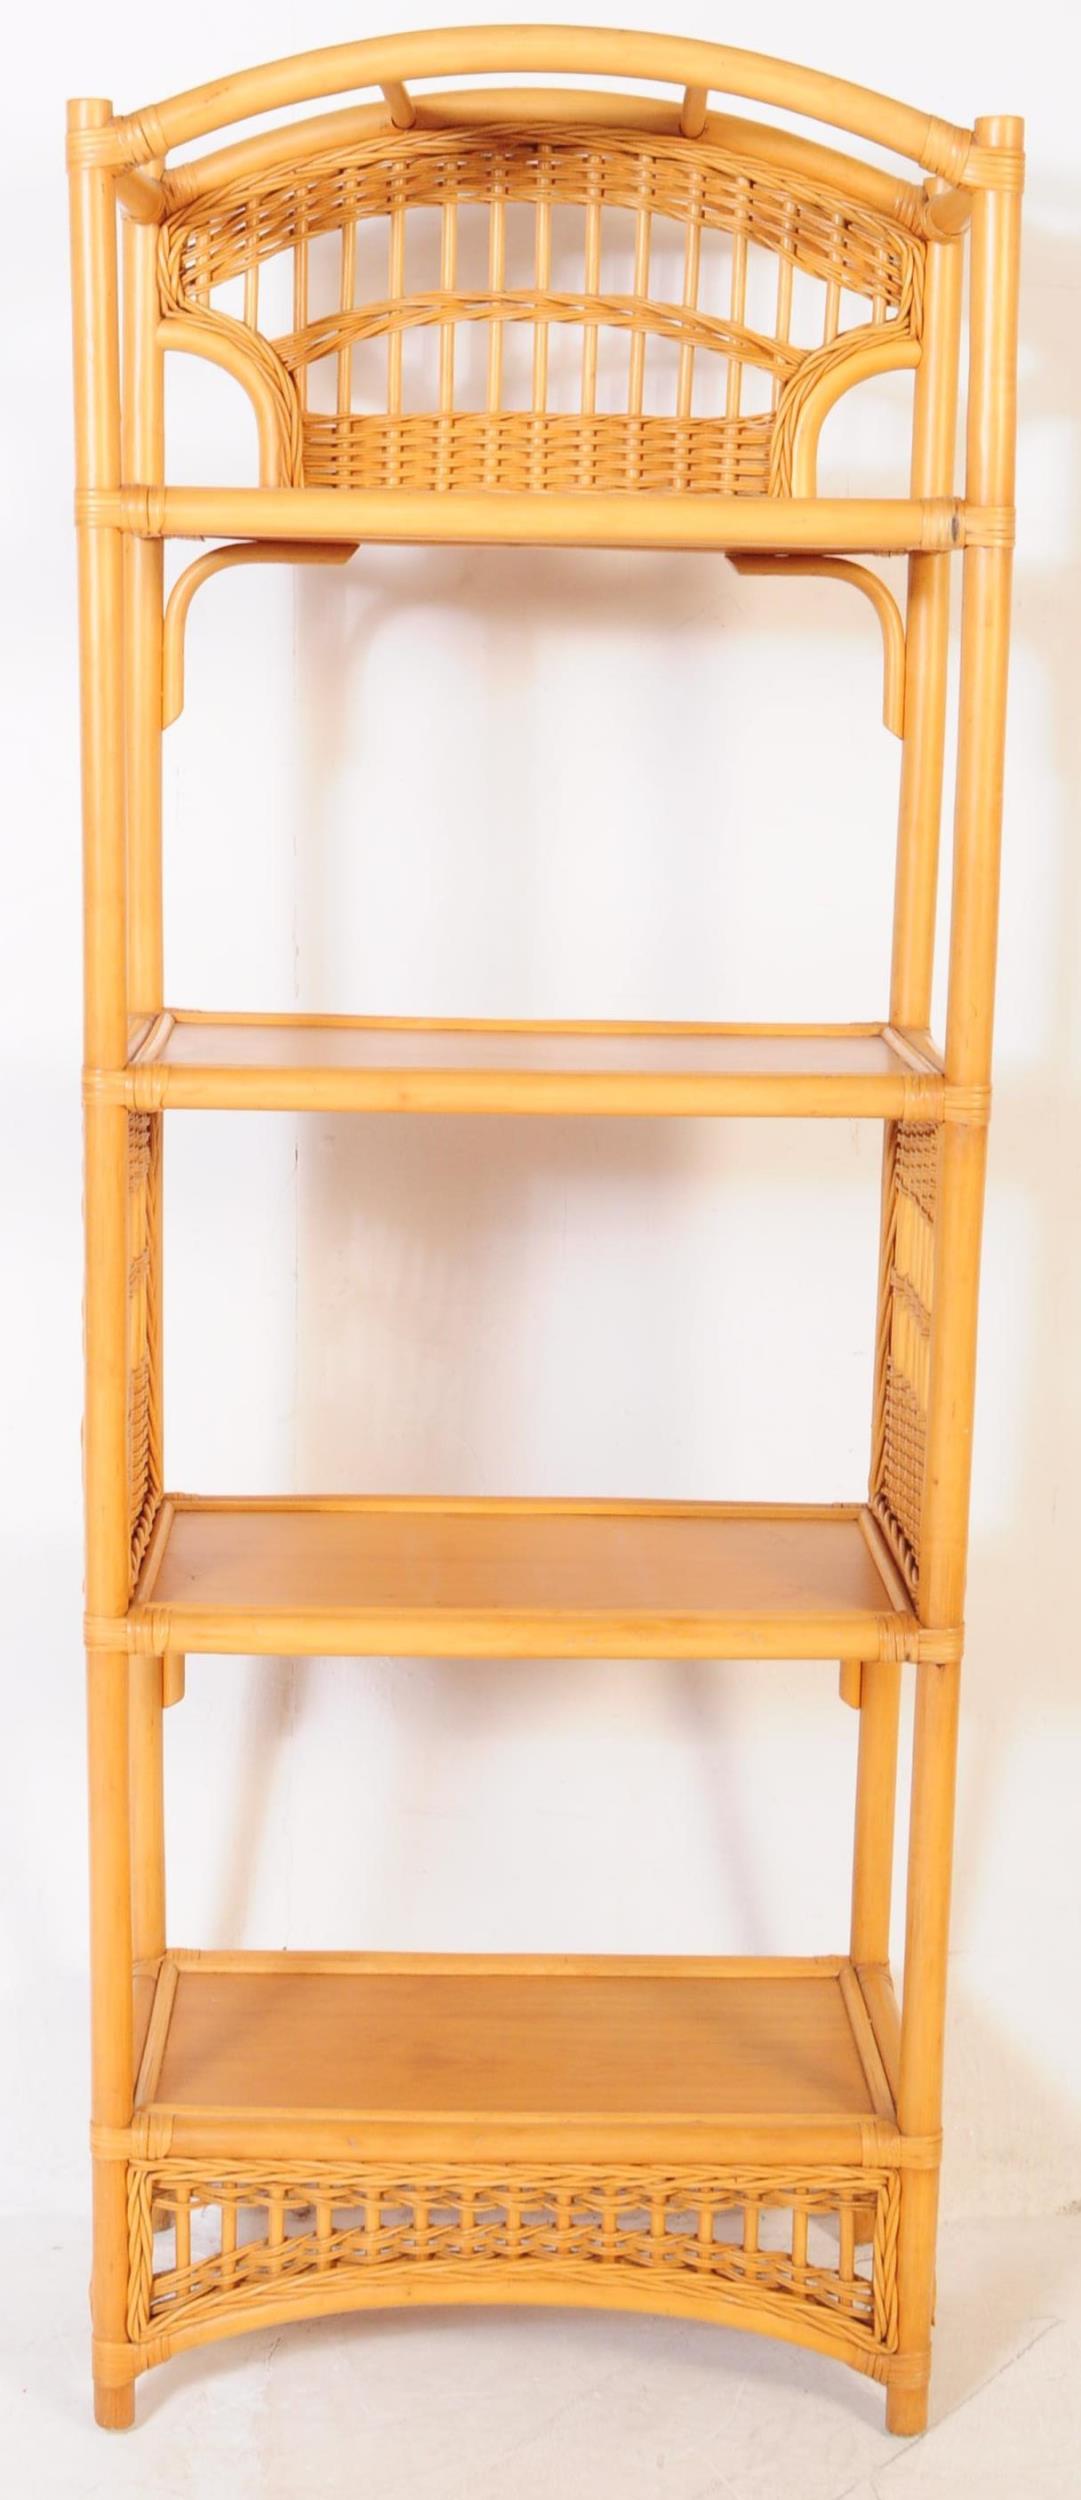 CONTEMPORARY 21ST CENTURY BAMBOO & RATTAN SHELVING UNIT - Image 3 of 12